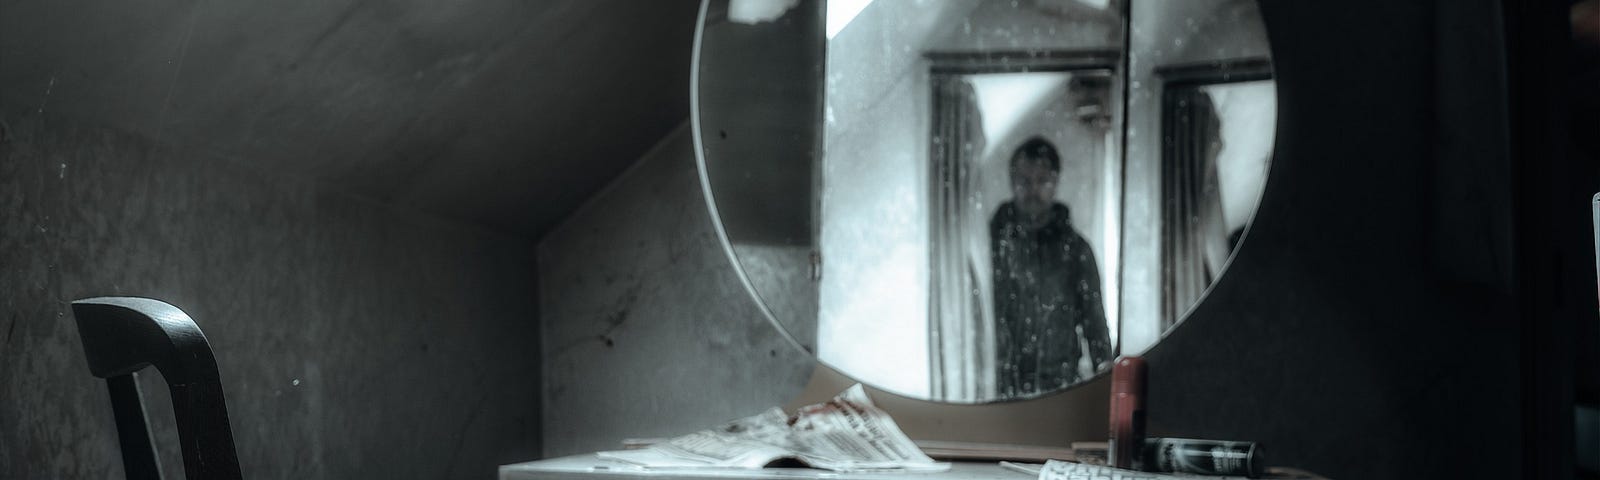 Gloomy dark picture with little colour of a chair in front of an old dressing table with a round mirror on top. The room appears to be in an attic and is dusty. In the mirror a man is seen entering from a doorway, giving the picture an eerie feeling.